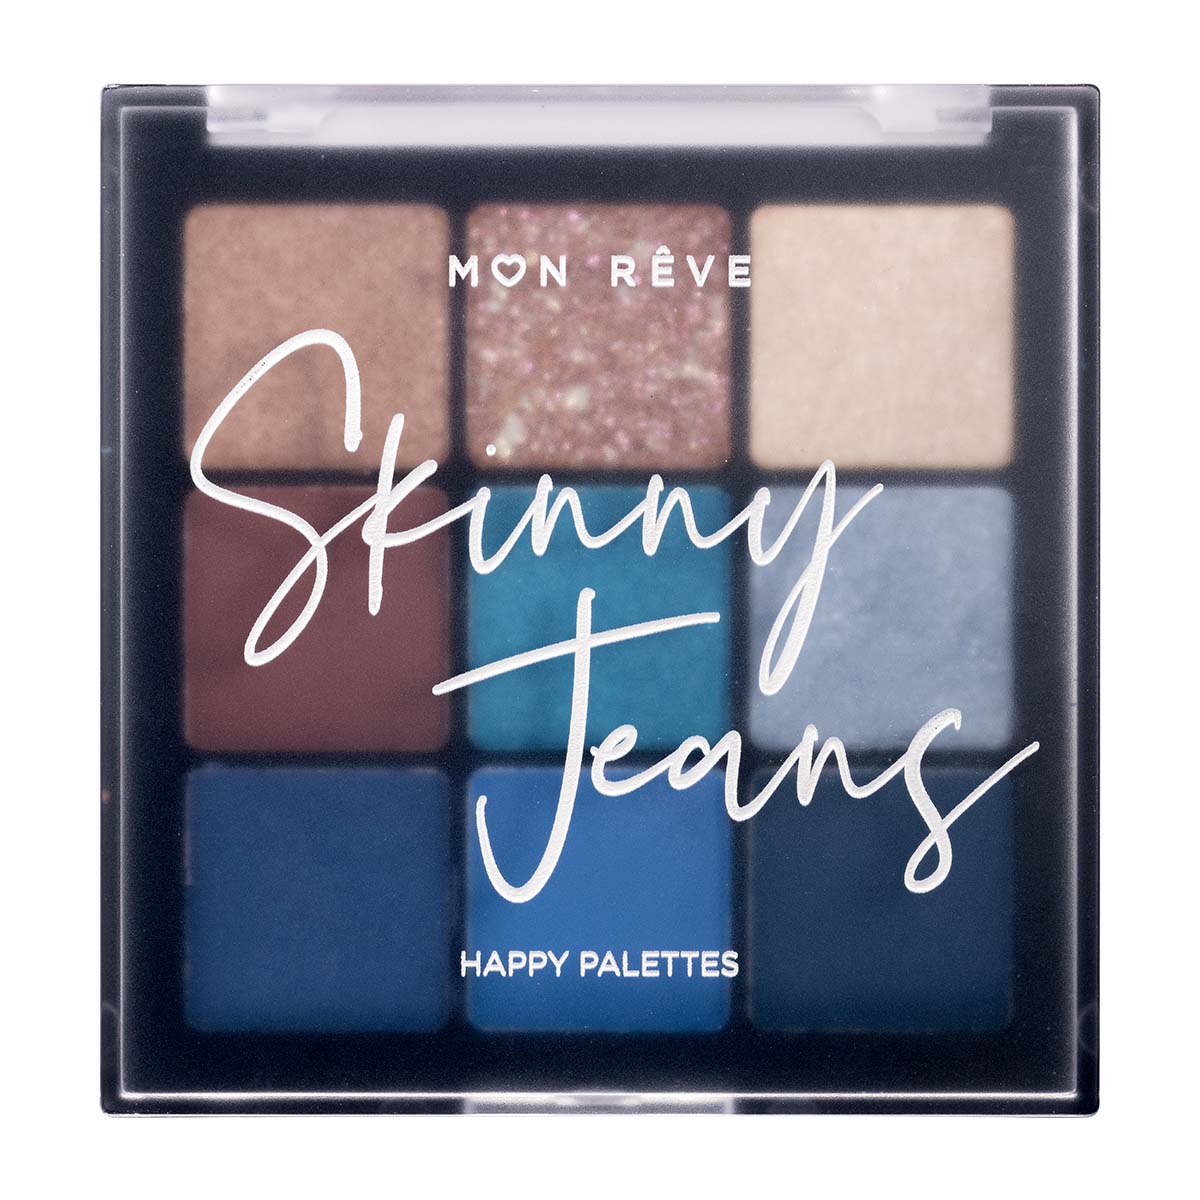 05 SKINNY JEANS HAPPY PALETTES